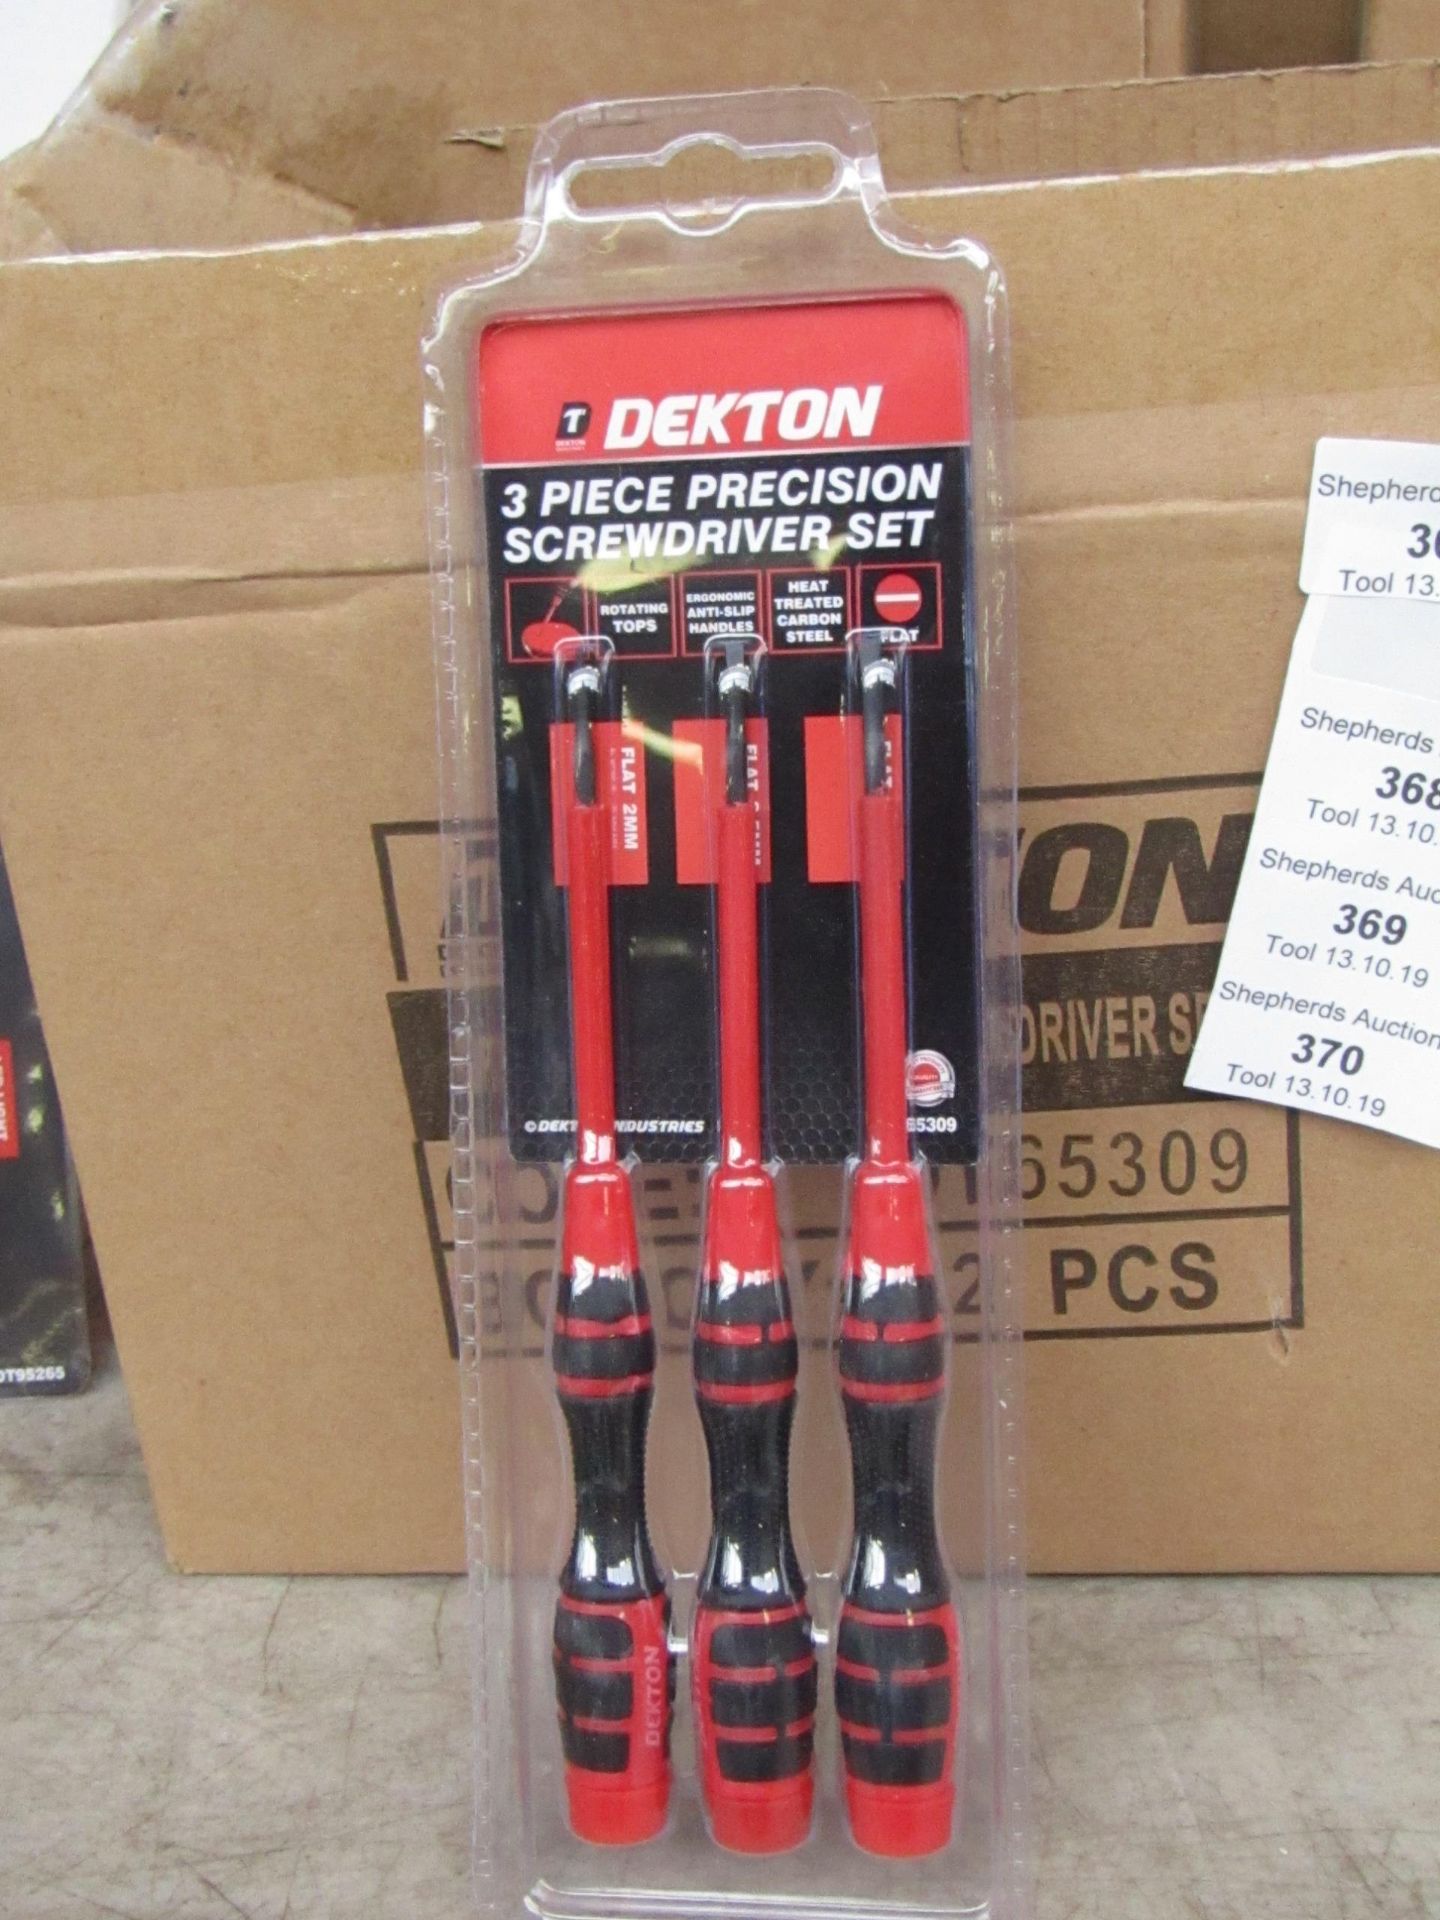 Pack of 3 Precision Screw drivers, new and blister packed